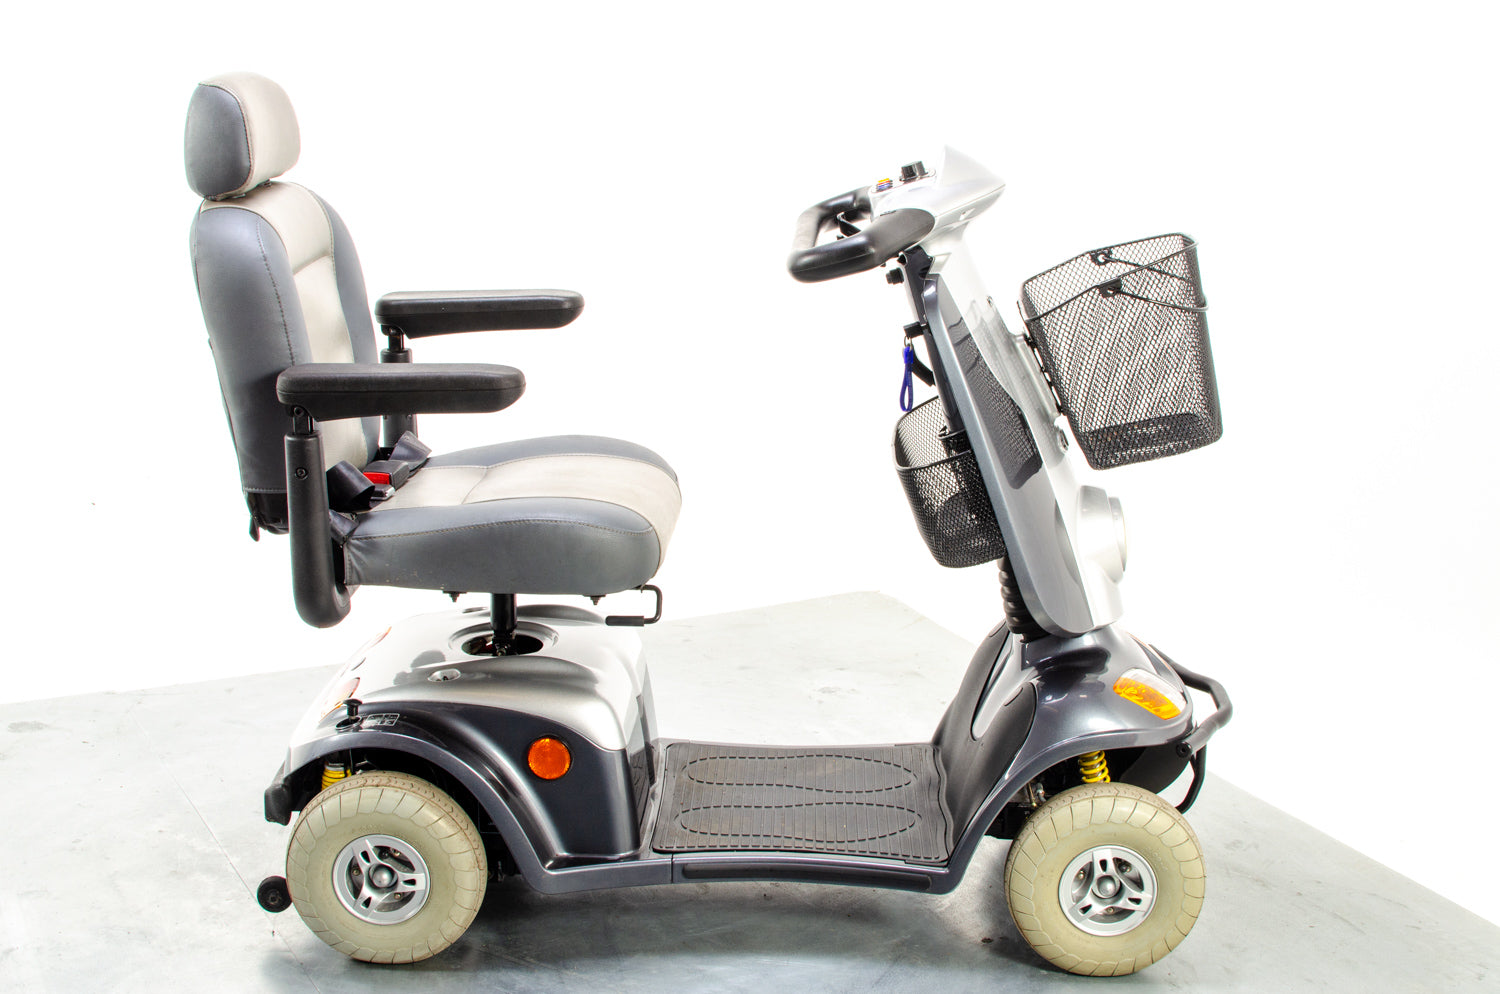 Kymco Midi XLS 8mph Used Mobility Scooter Road Pavement Suspension Pneumatic Tyres